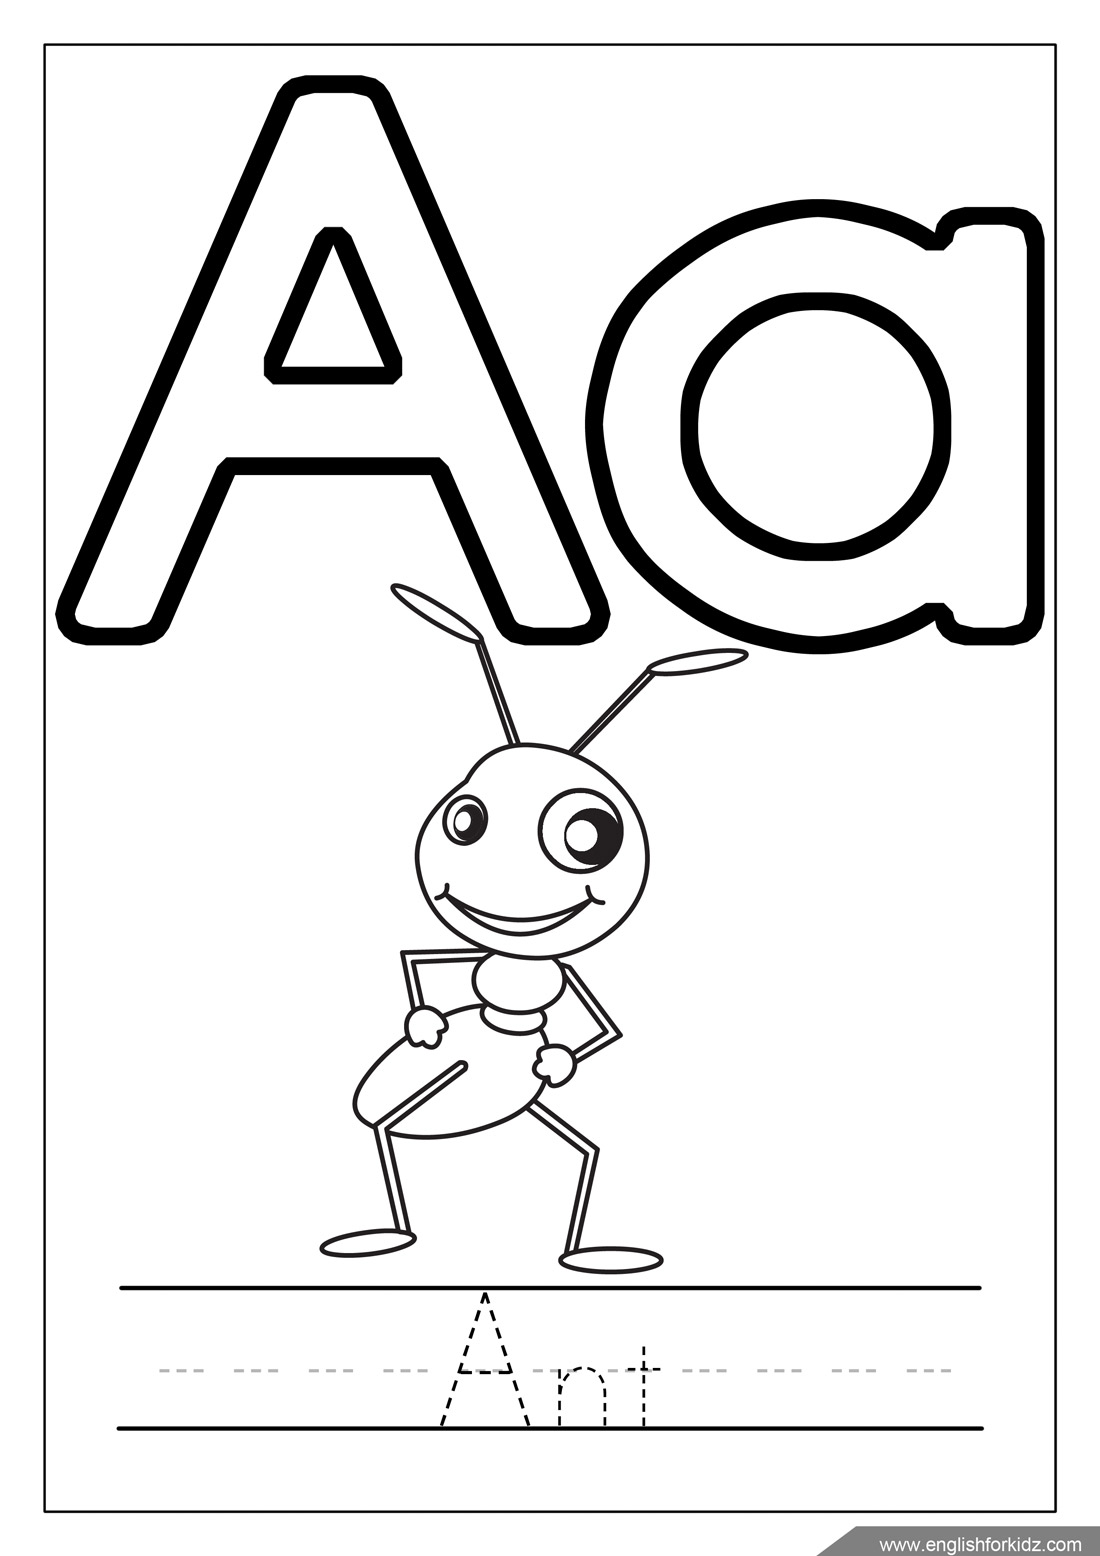 English for kids step by step letter a worksheets flash cards coloring pages